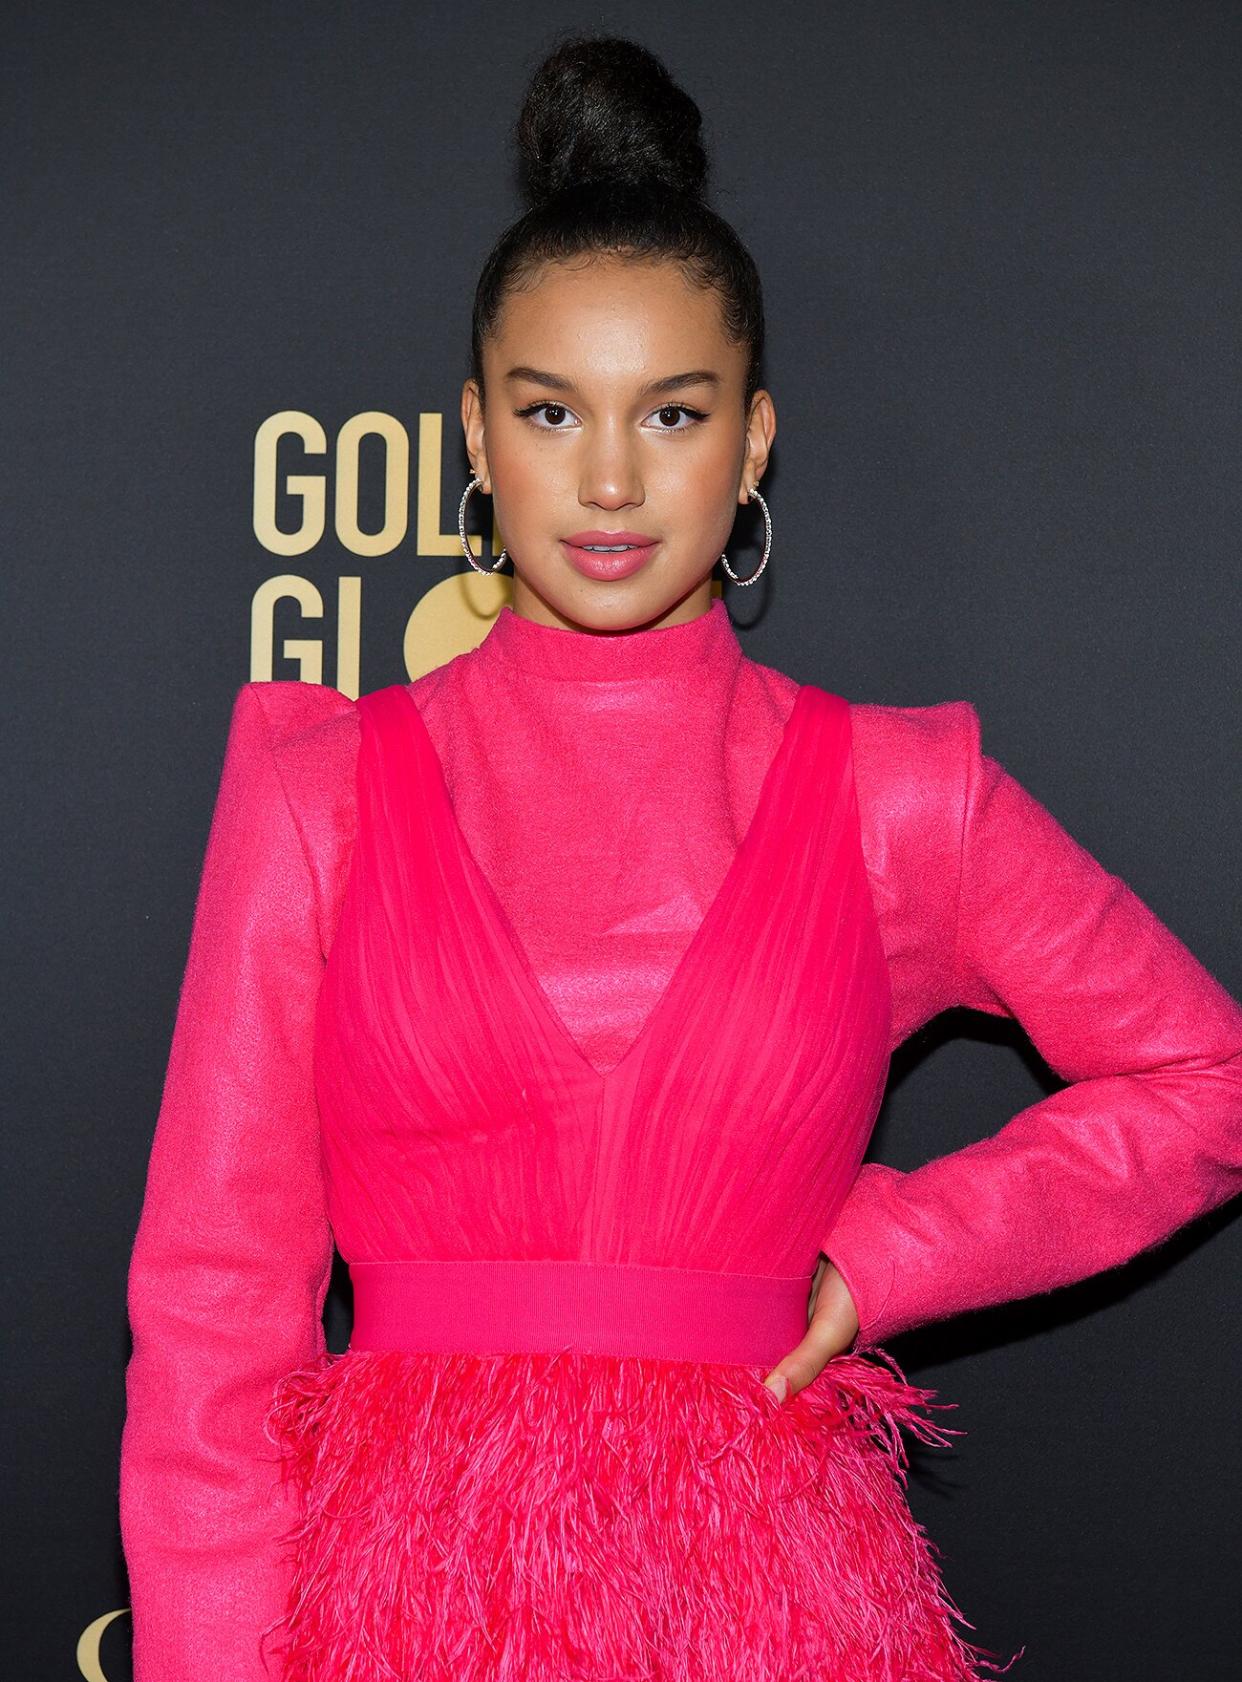 Sofia Wylie attends the HFPA and THR Golden Globe Ambassador Party at Catch LA on November 14, 2019